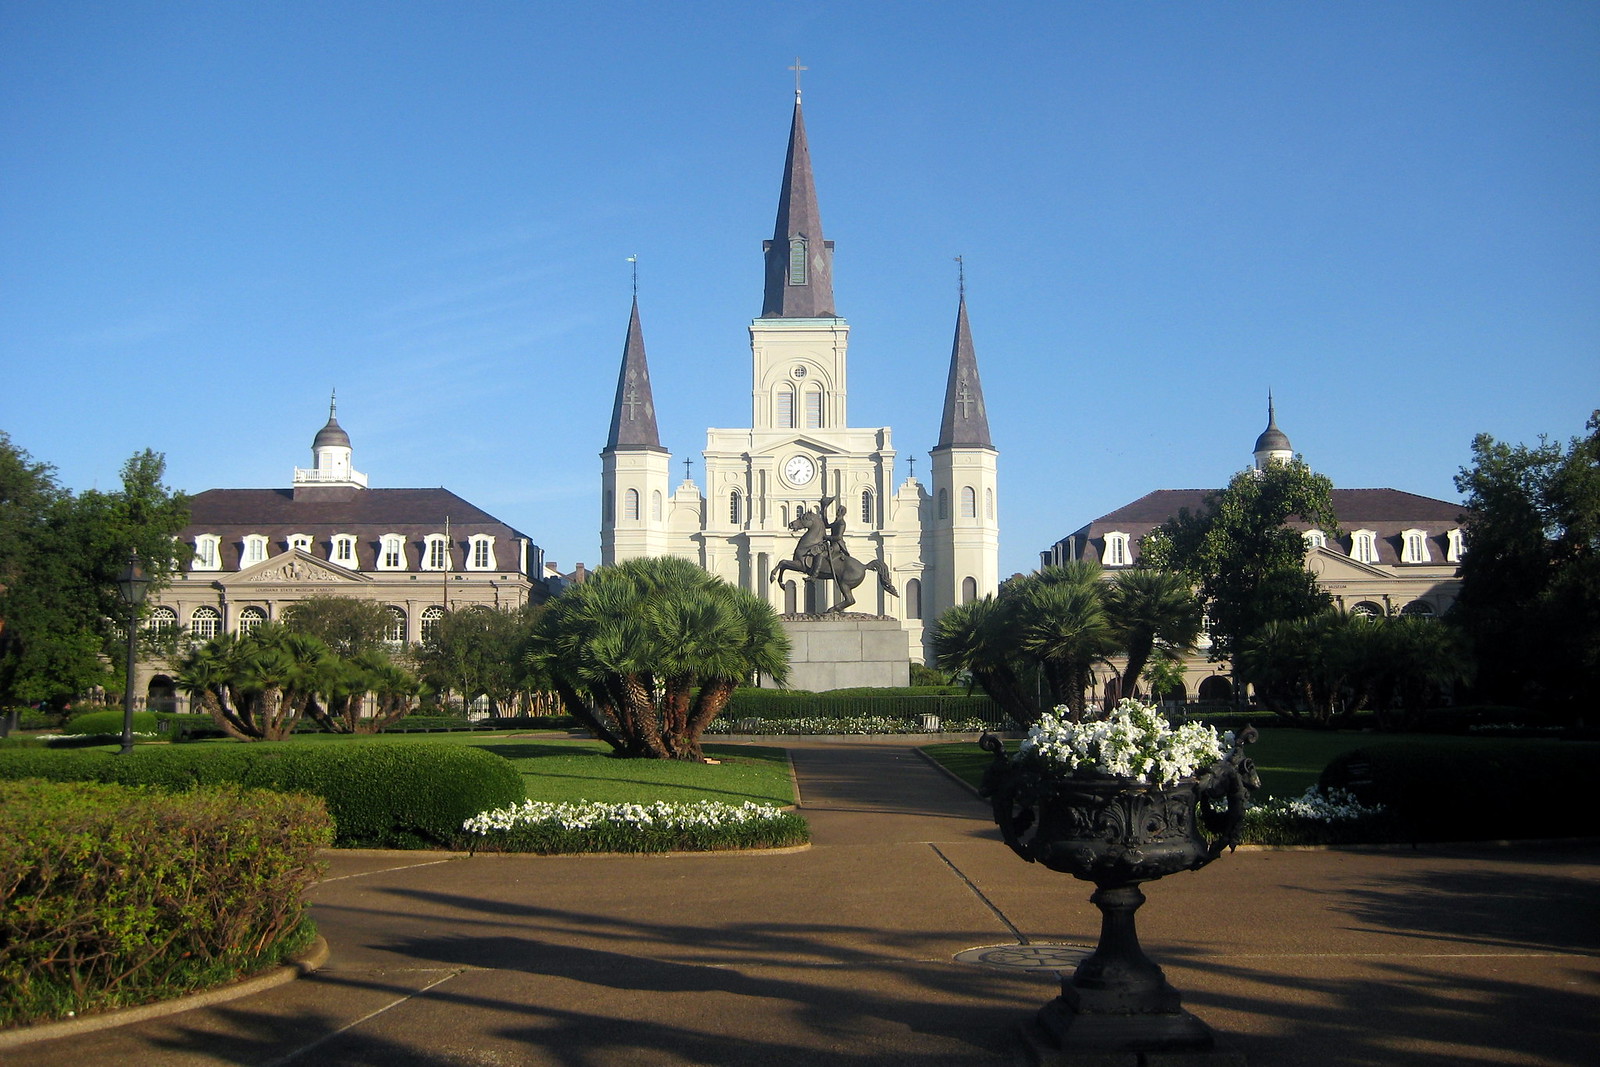 St. Louis Cathedral in New Orleans' French Quarter is North America's oldest cathedral.